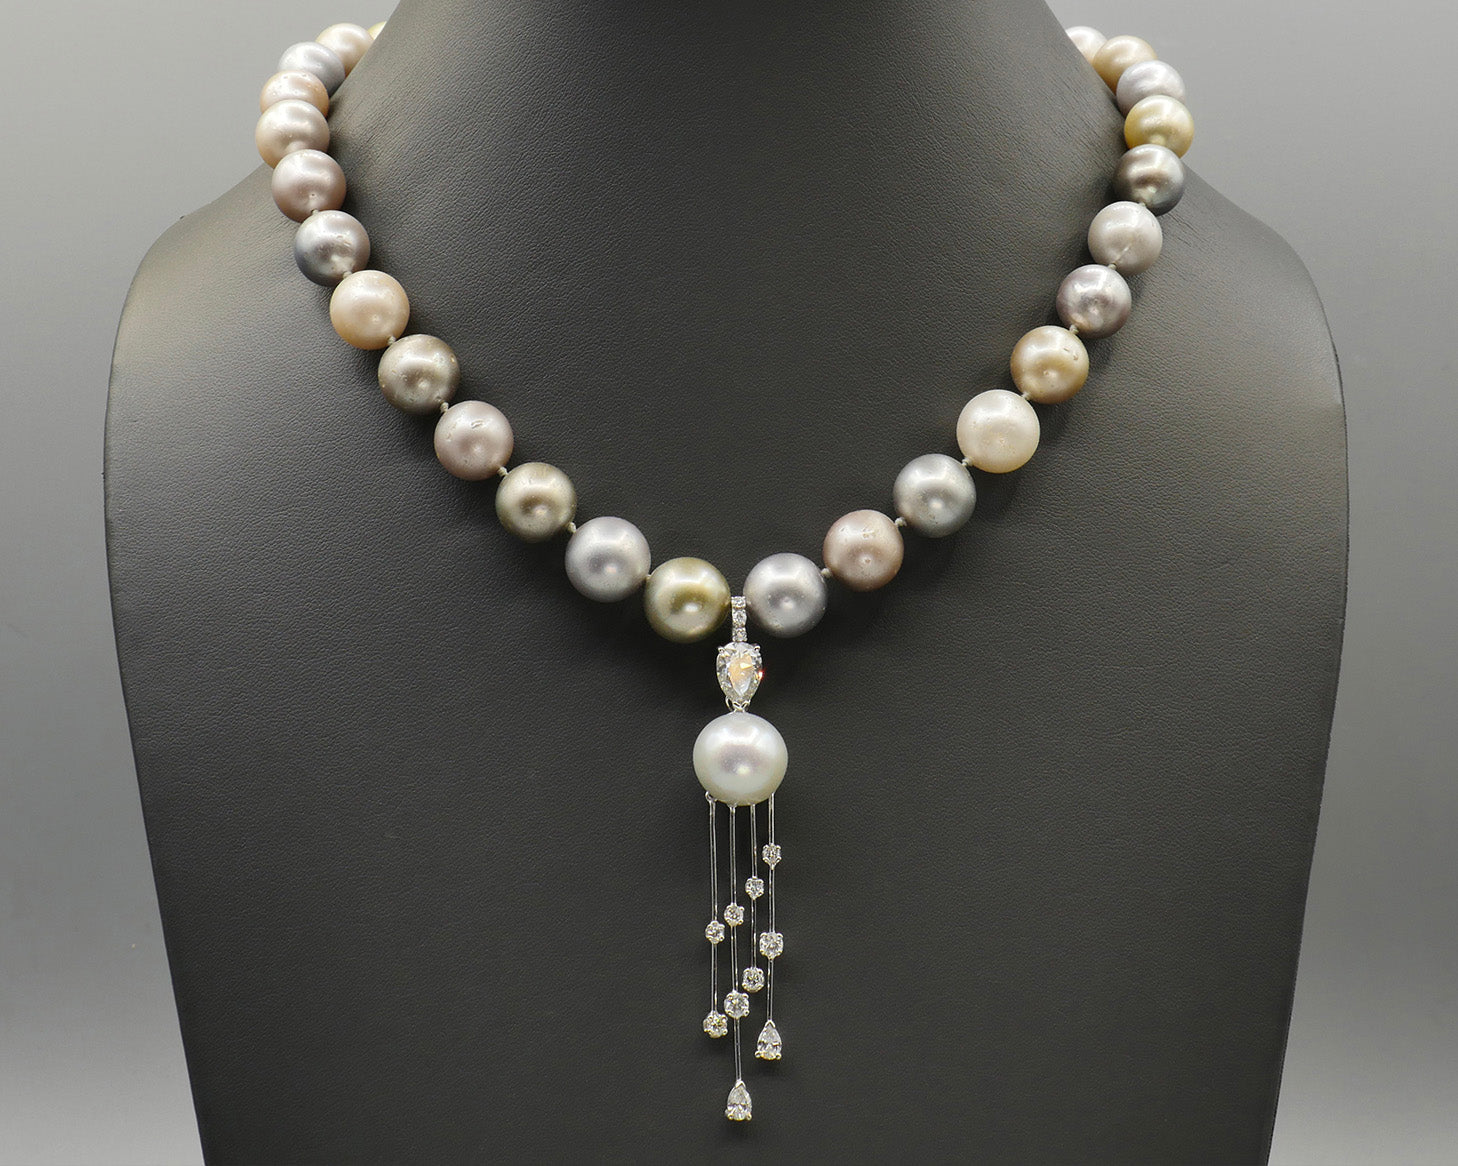 Pastel South Sea Pearl Necklace with Diamond Waterfall Pendant